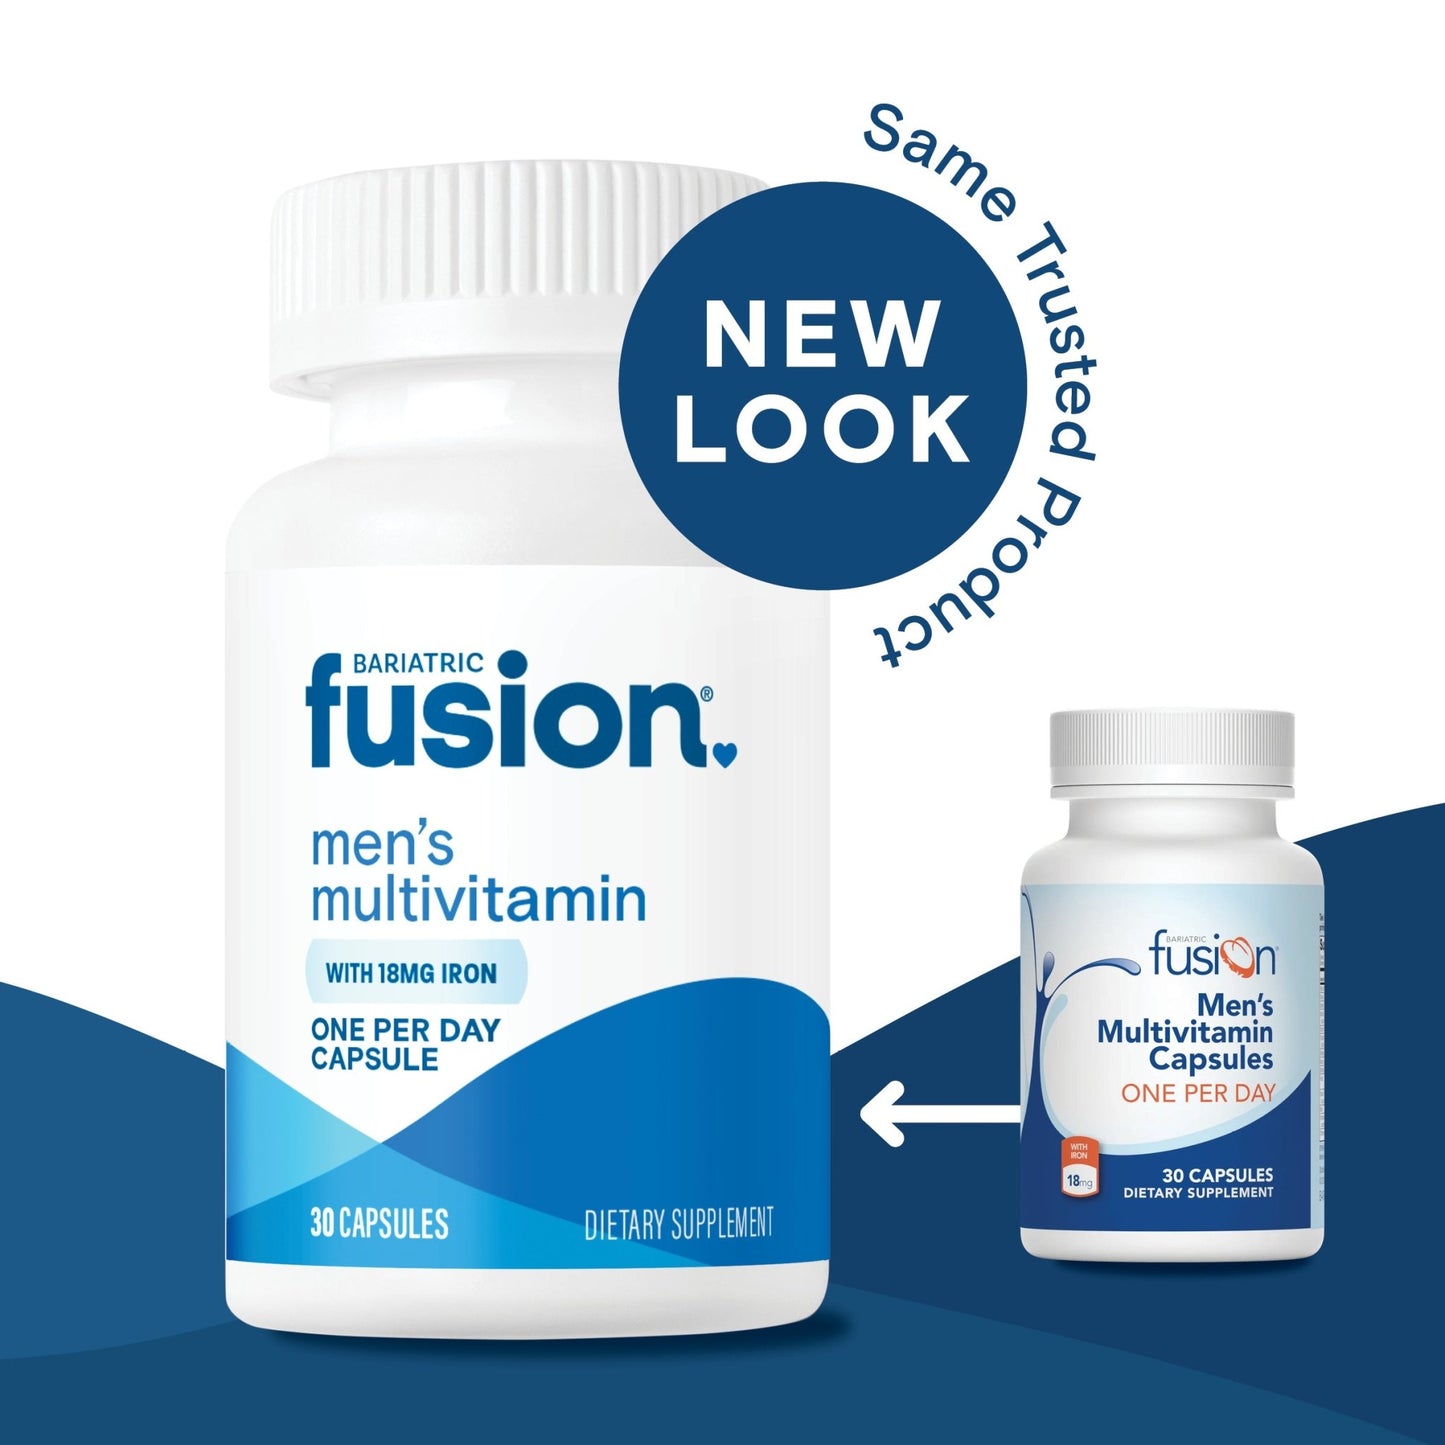 Bariatric Fusion Men’s One Per Day Bariatric Multivitamin 30 capsules new look, same trusted product.